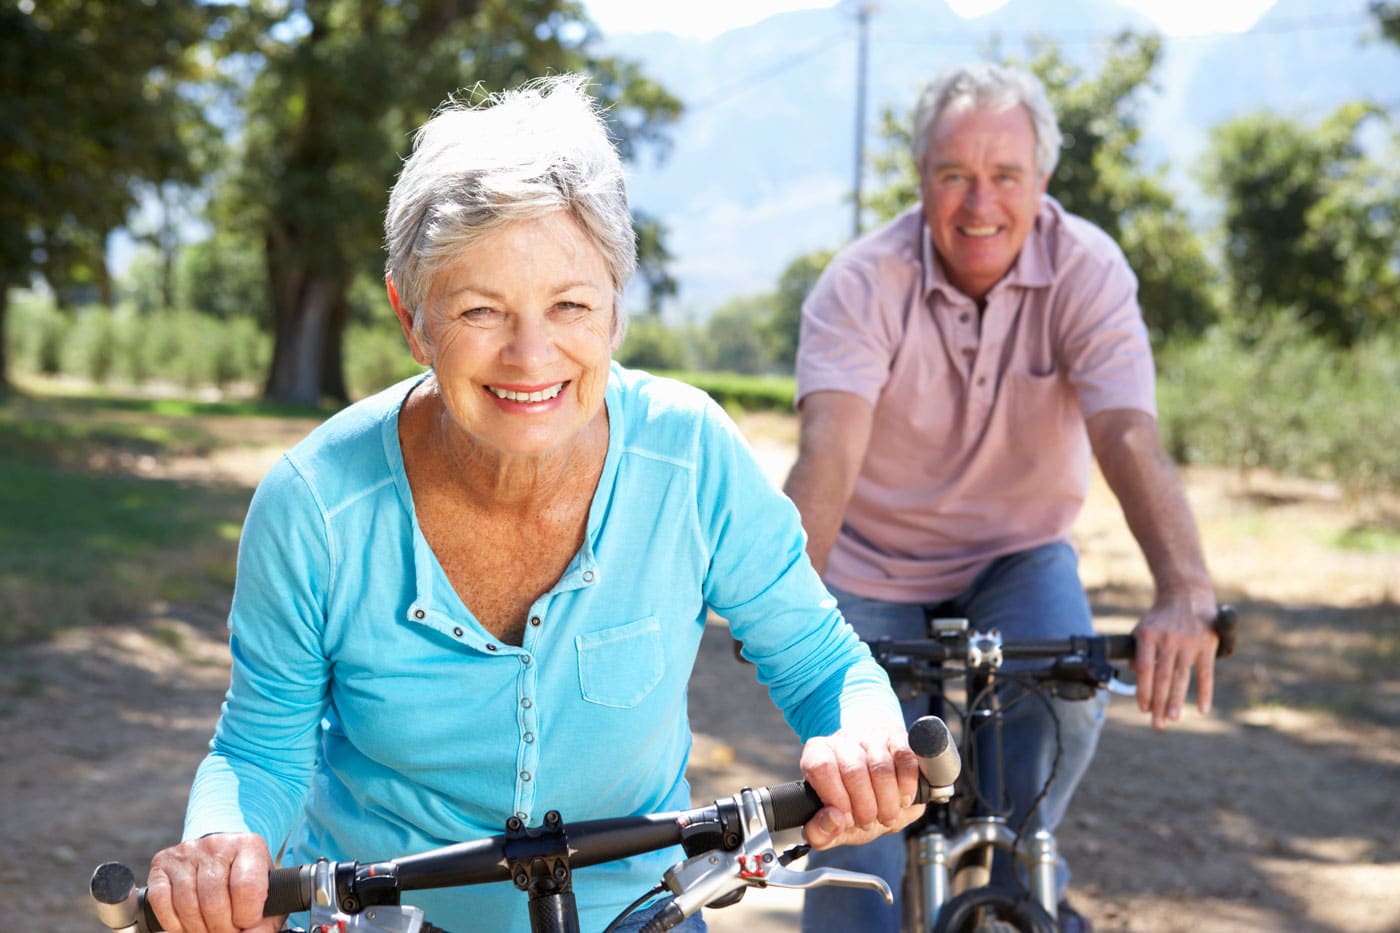 An older couple riding bikes on a country road.